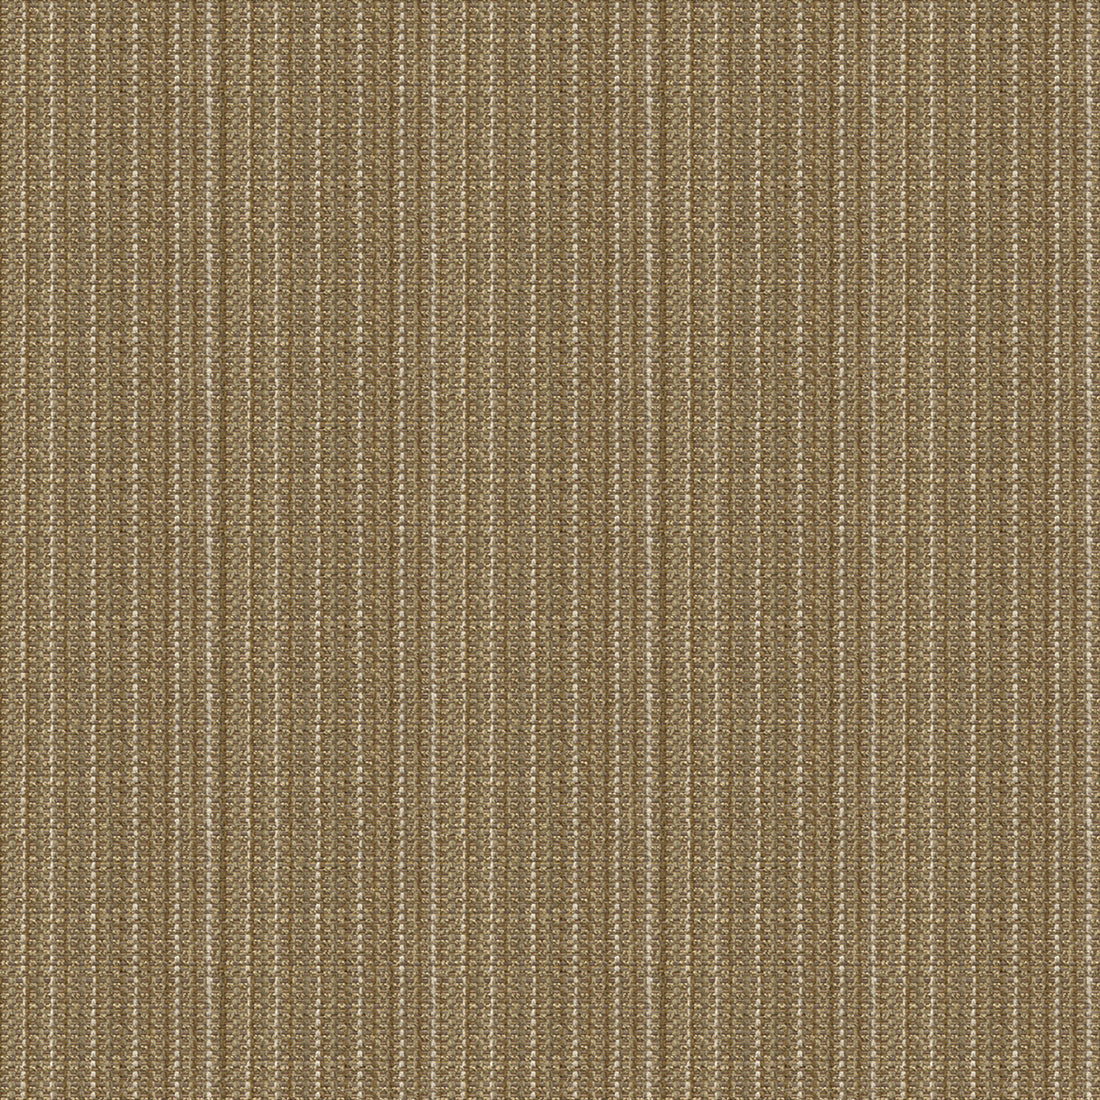 Kf Smt fabric - pattern 28769.616.0 - by Kravet Smart in the Gis collection